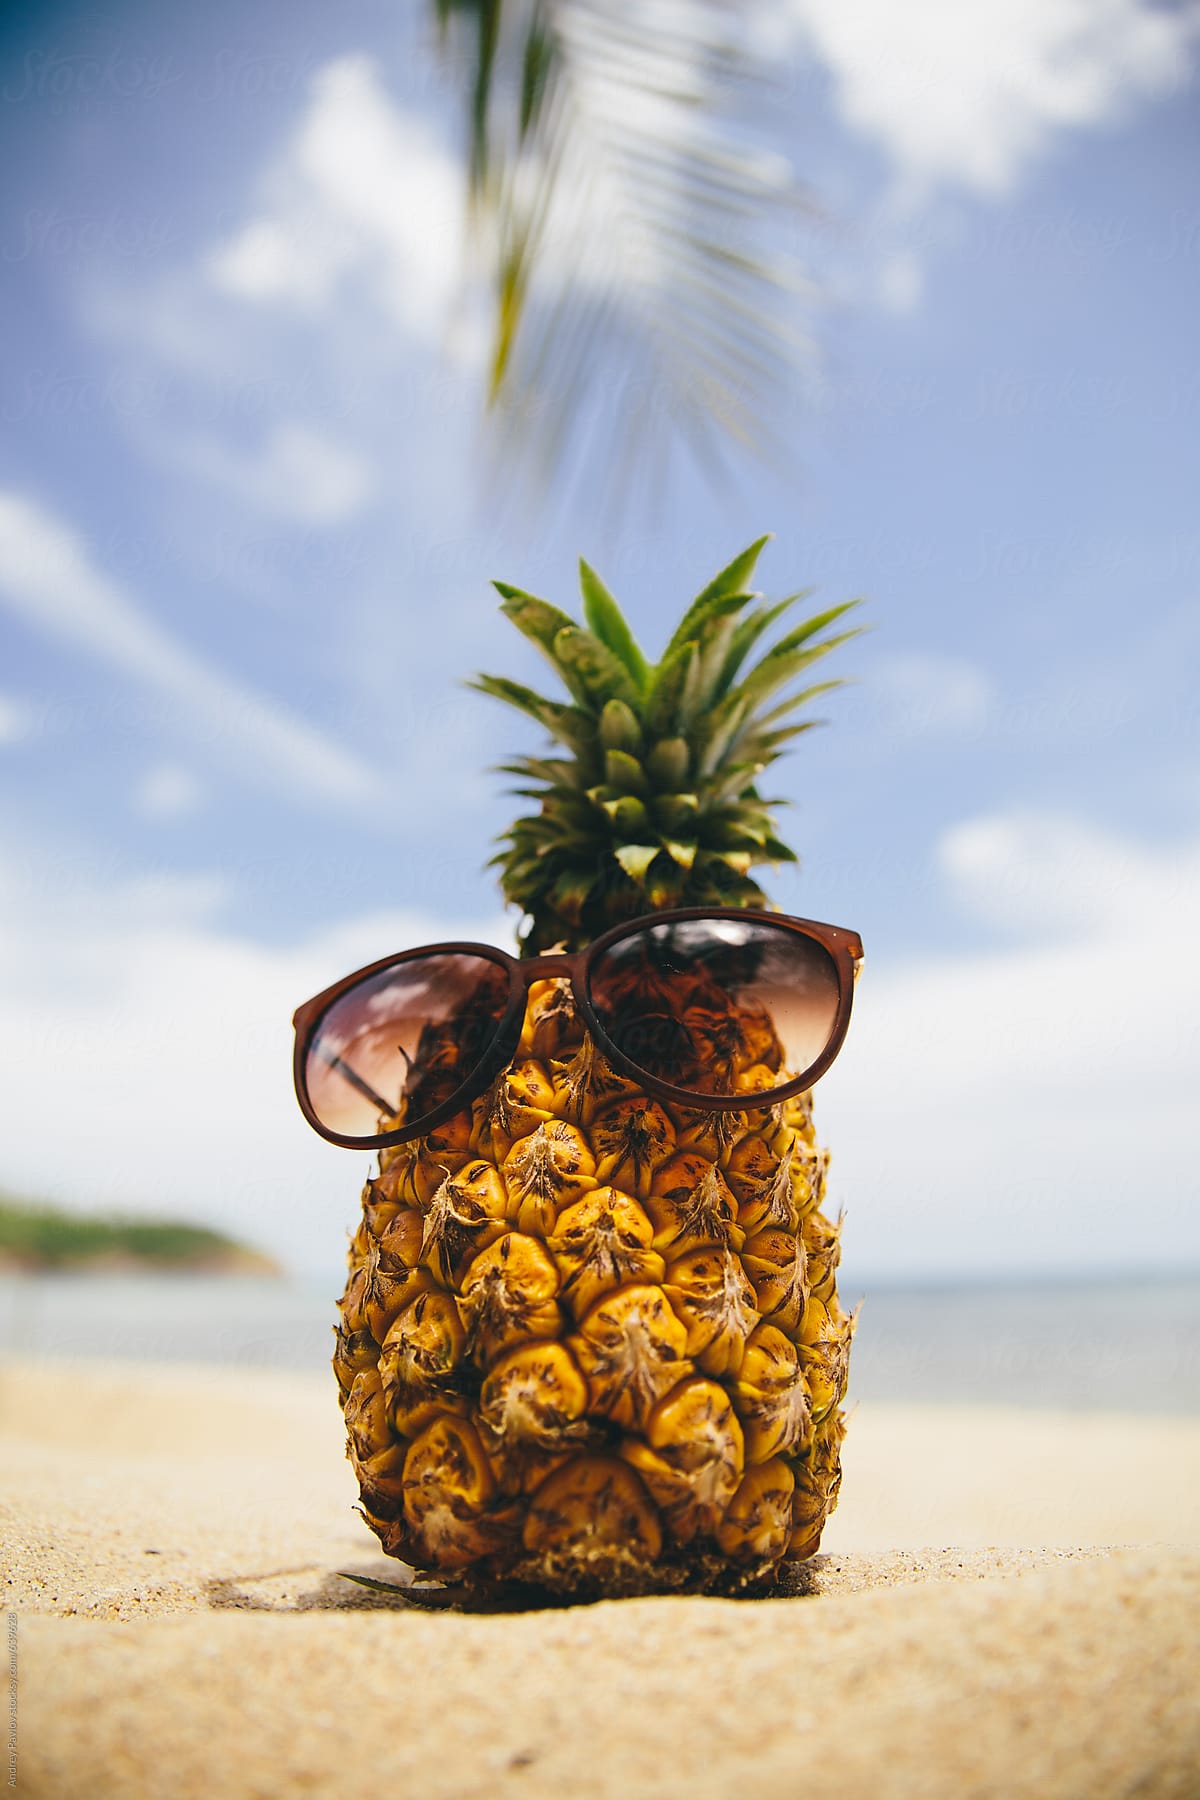 Pineapple dressed in sunglasses on the beach